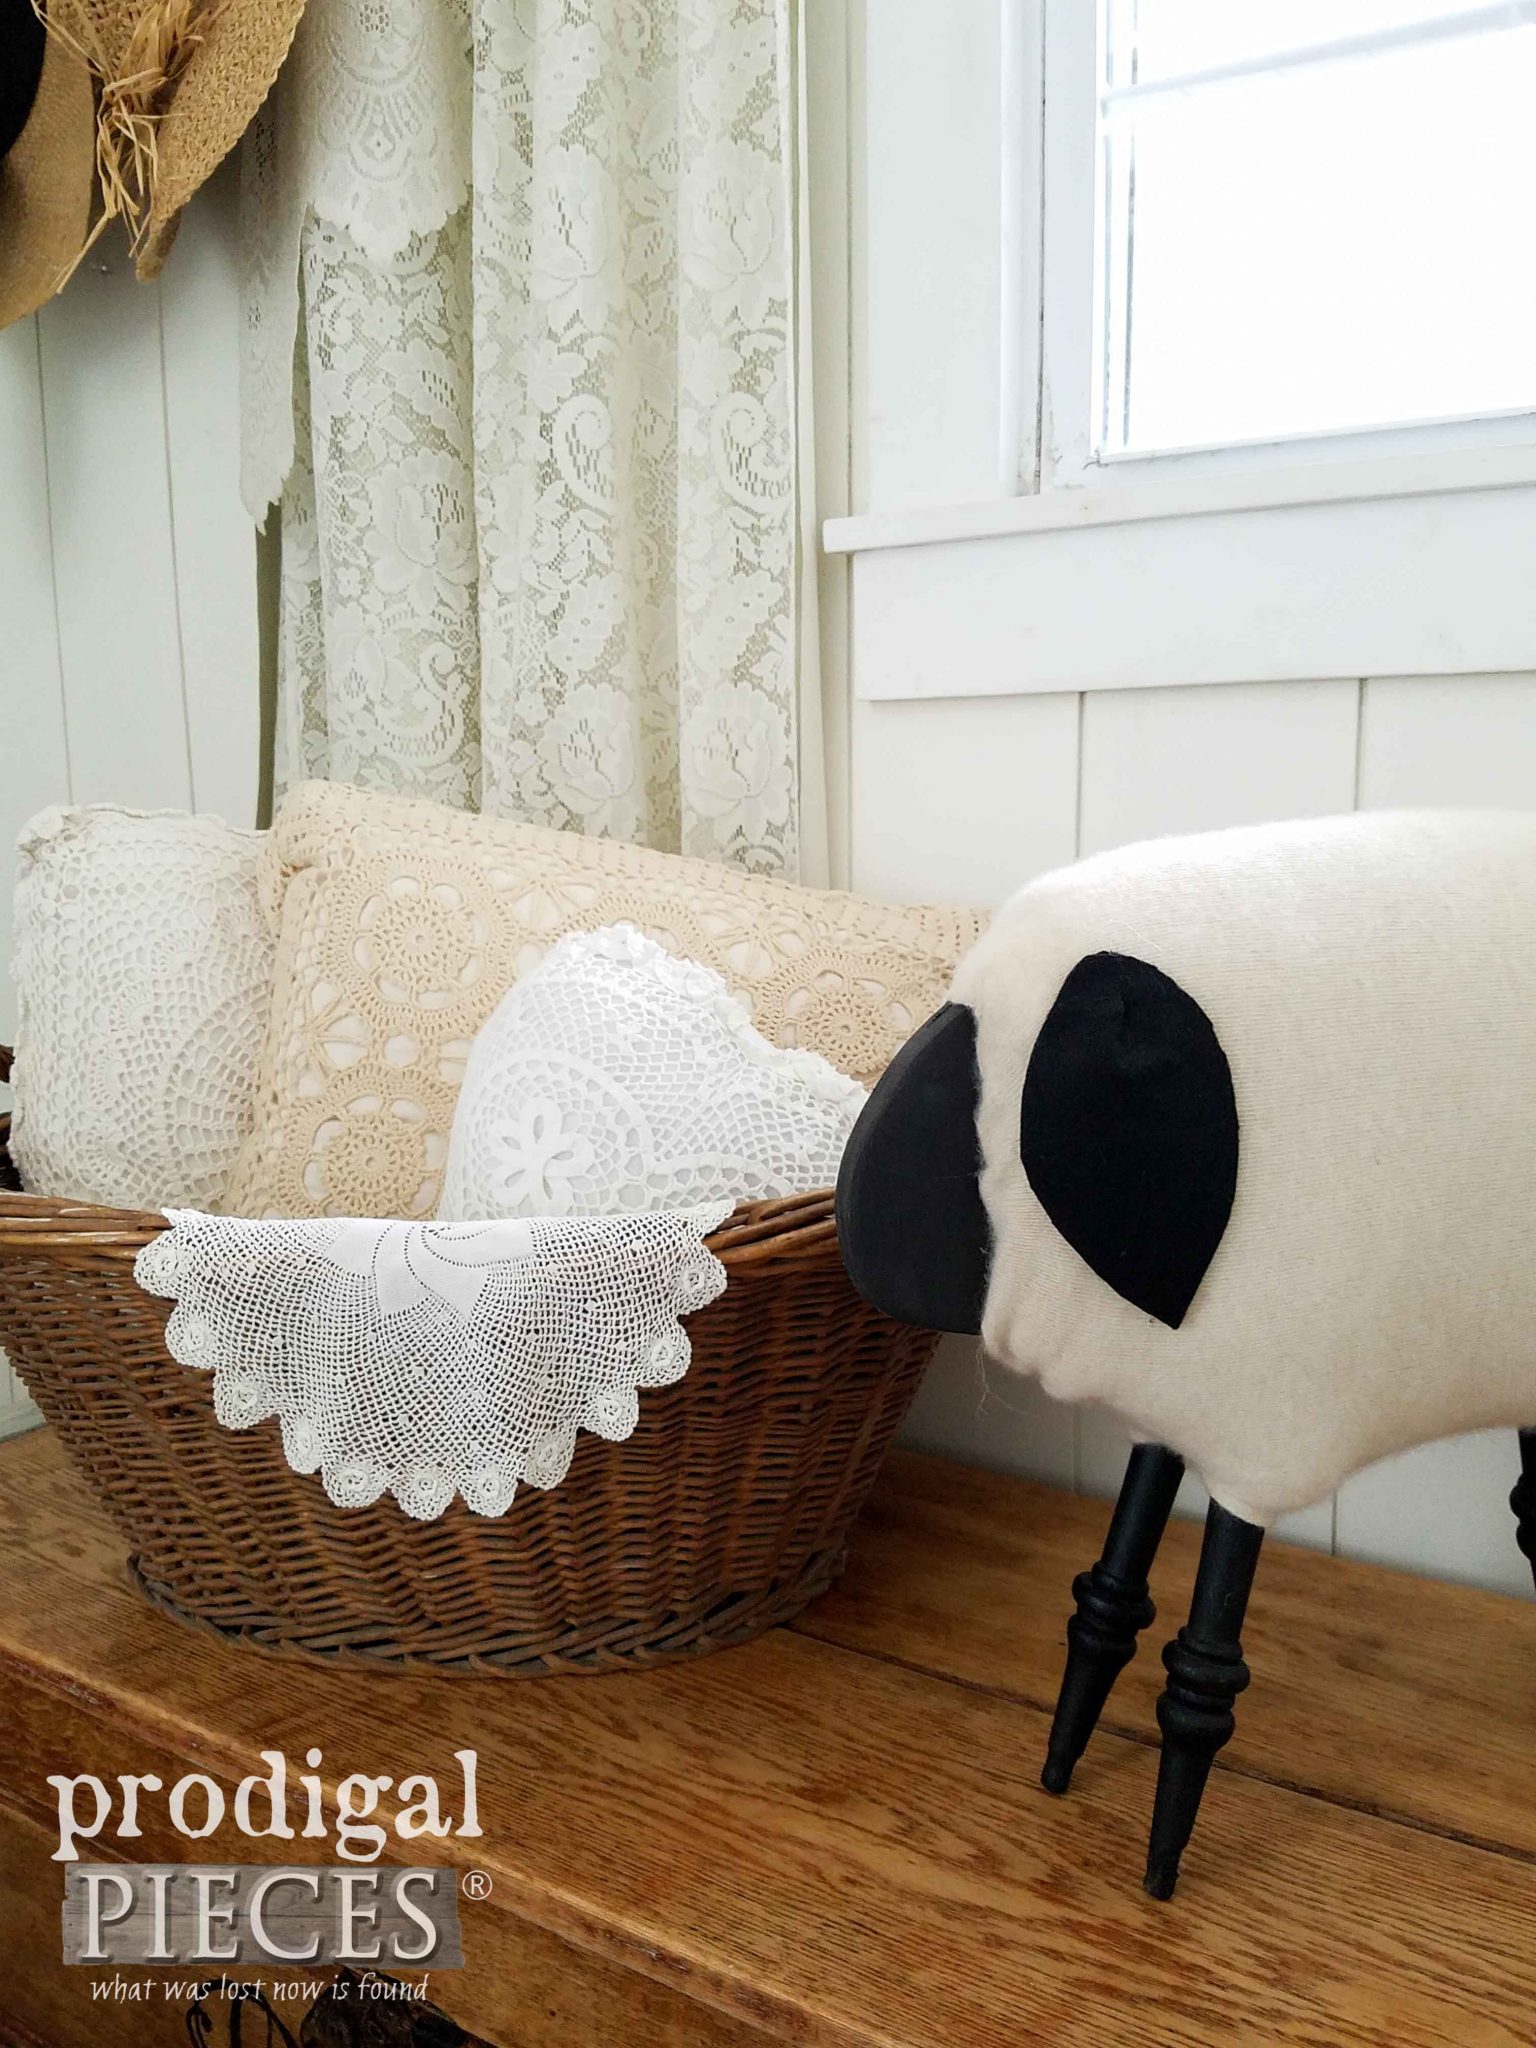 Farmhouse Vignette with Sheep and Laundry Basket by Prodigal Pieces | prodigalpieces.com